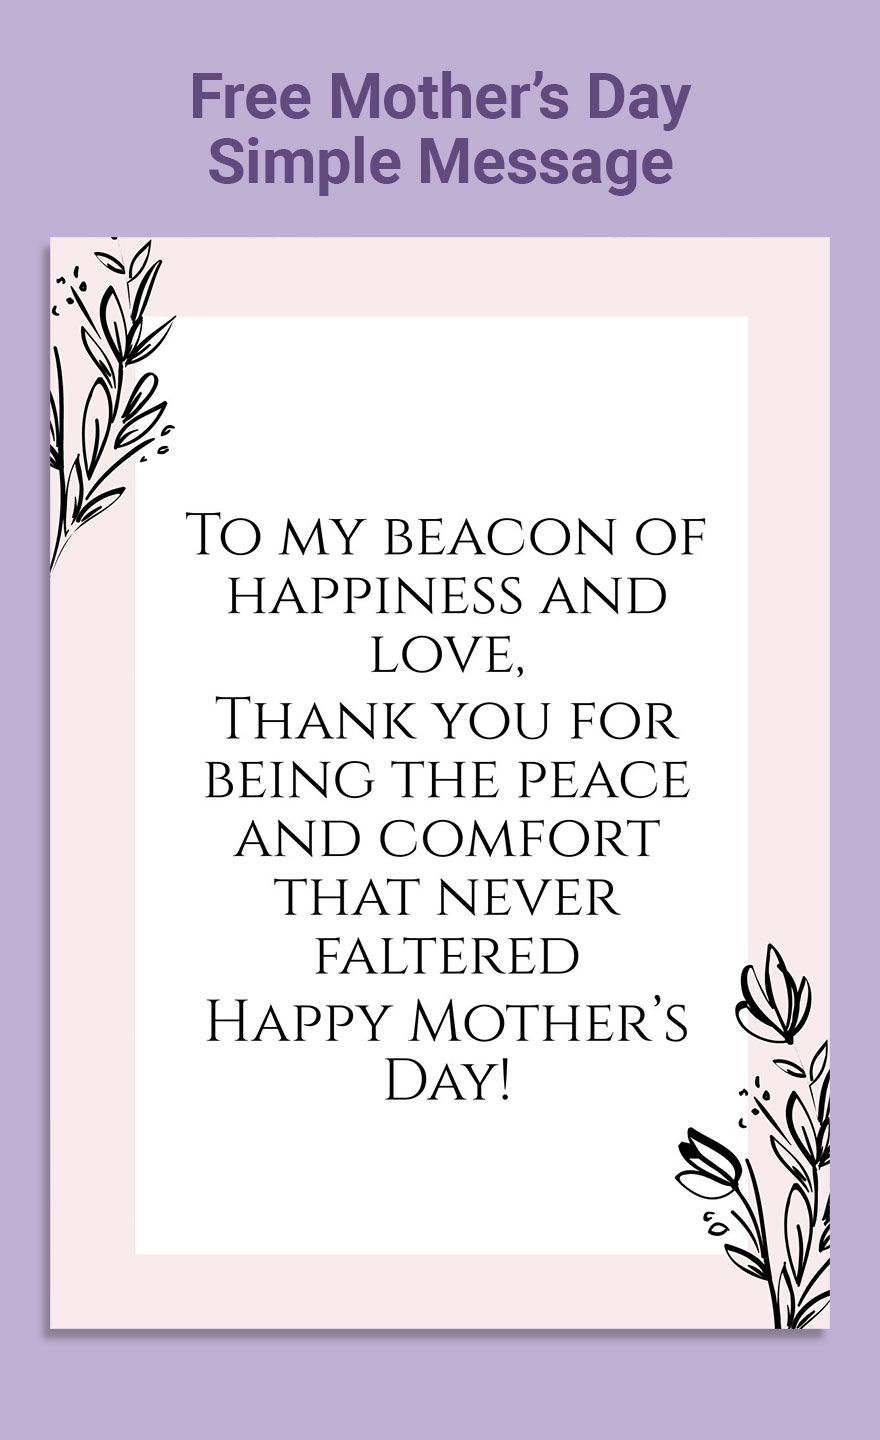 Feature your short and sweet messages in a beautiful card that emits warmth in every design. With this Mother's Day Simple Message, you can let your true emotions shine as you let your creativity expr